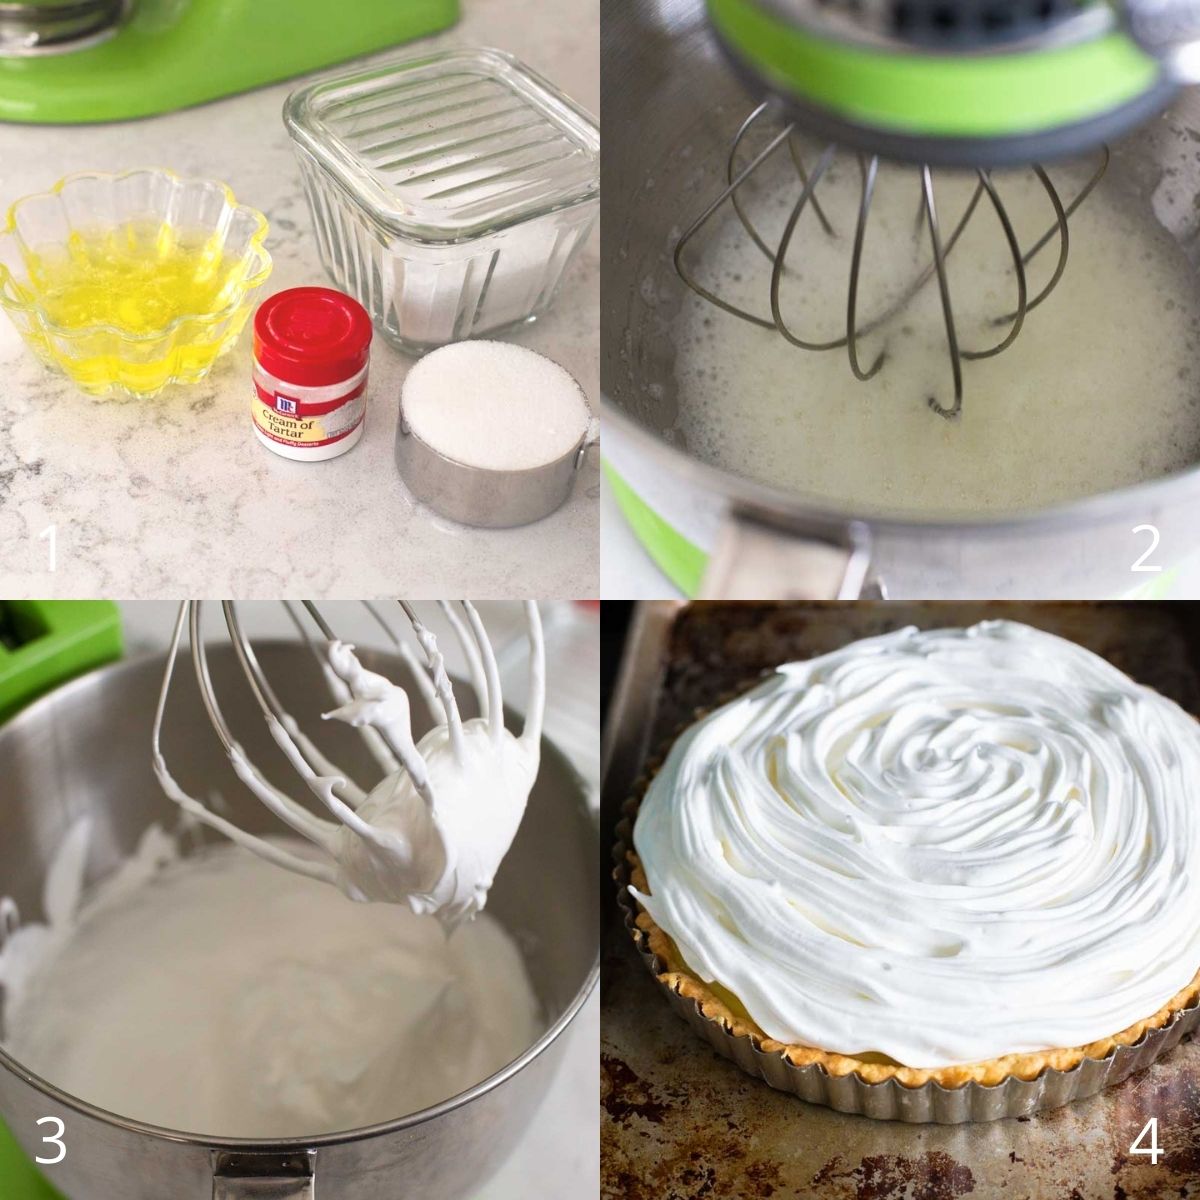 Step by step photos show how to make the egg white meringue topping.